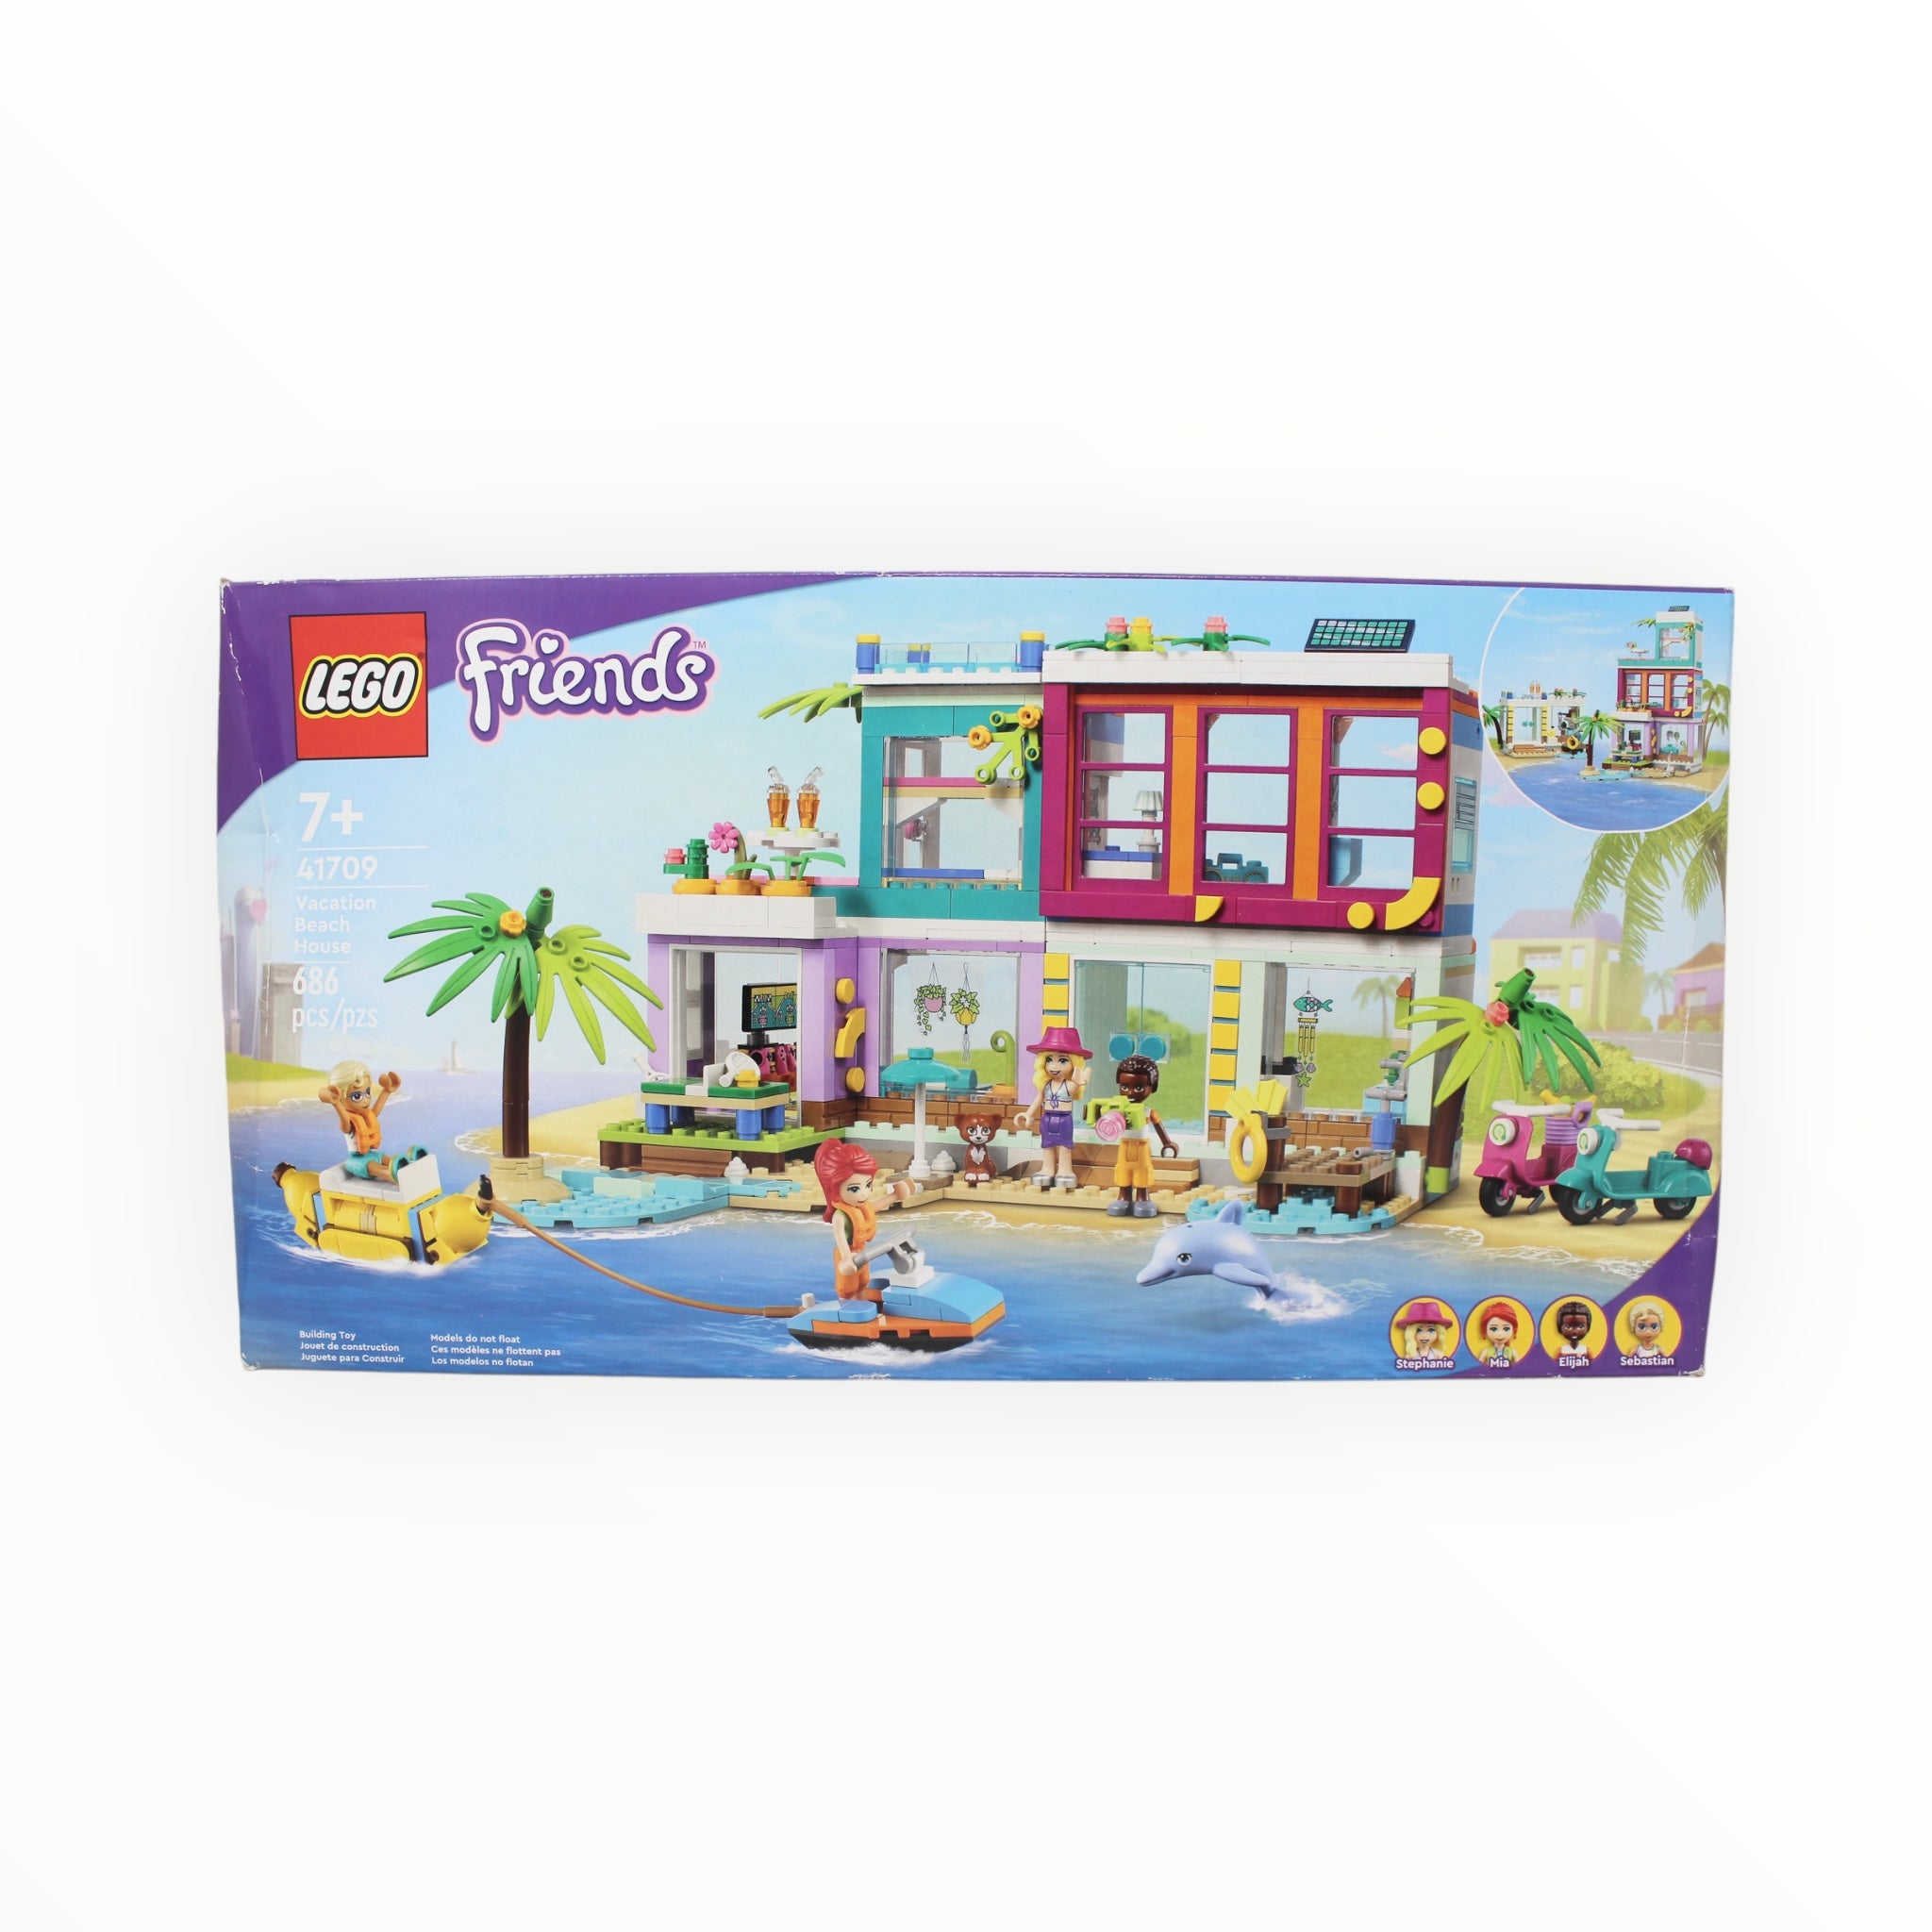 Retired Set 41709 Friends Vacation Beach House